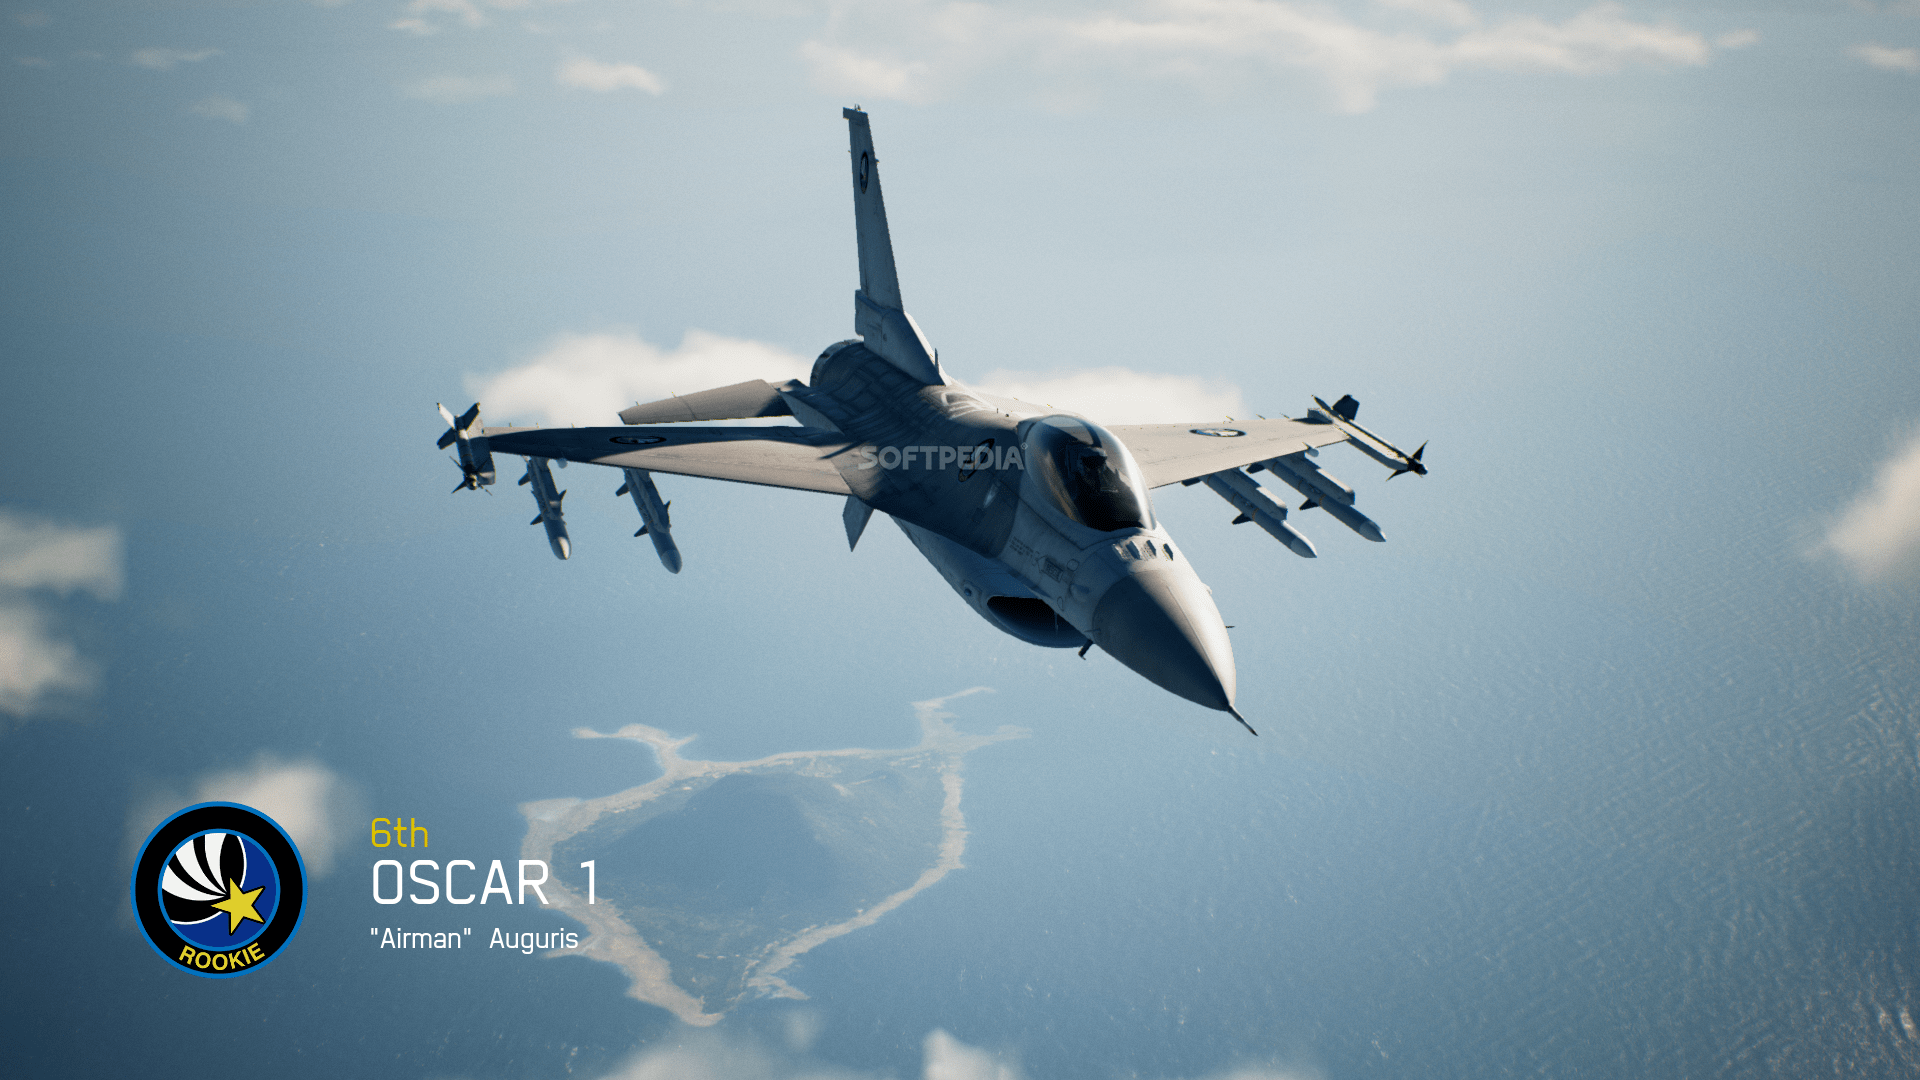 Ace Combat 7: Skies Unknown- Review and reflection at the ¾ mark